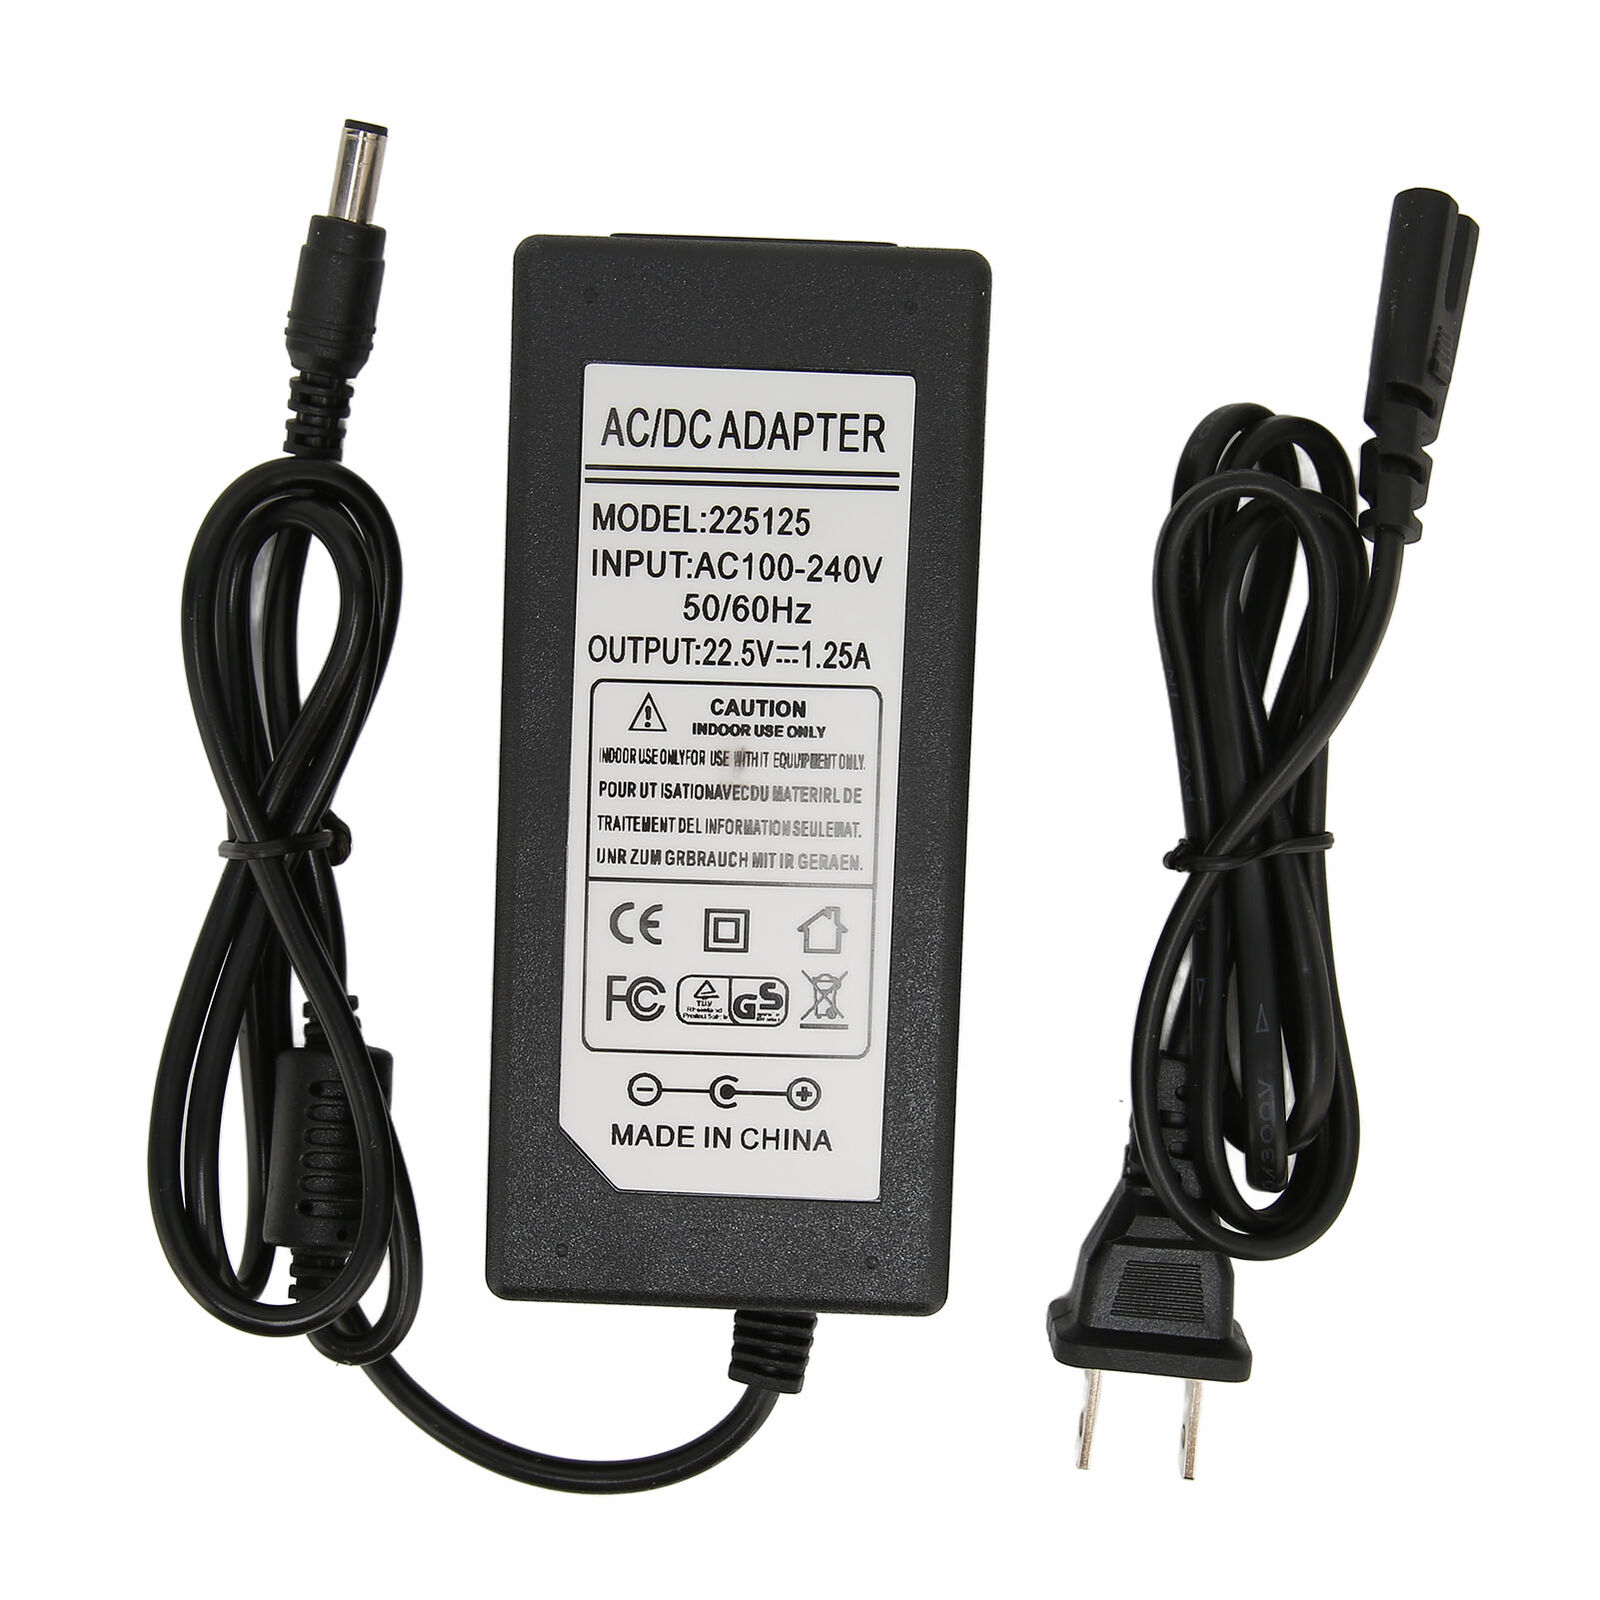 Adapter Charger Power Supply For Robot Power Supply Cleaner Equipment Brand: Unbranded Input Voltage: AC1